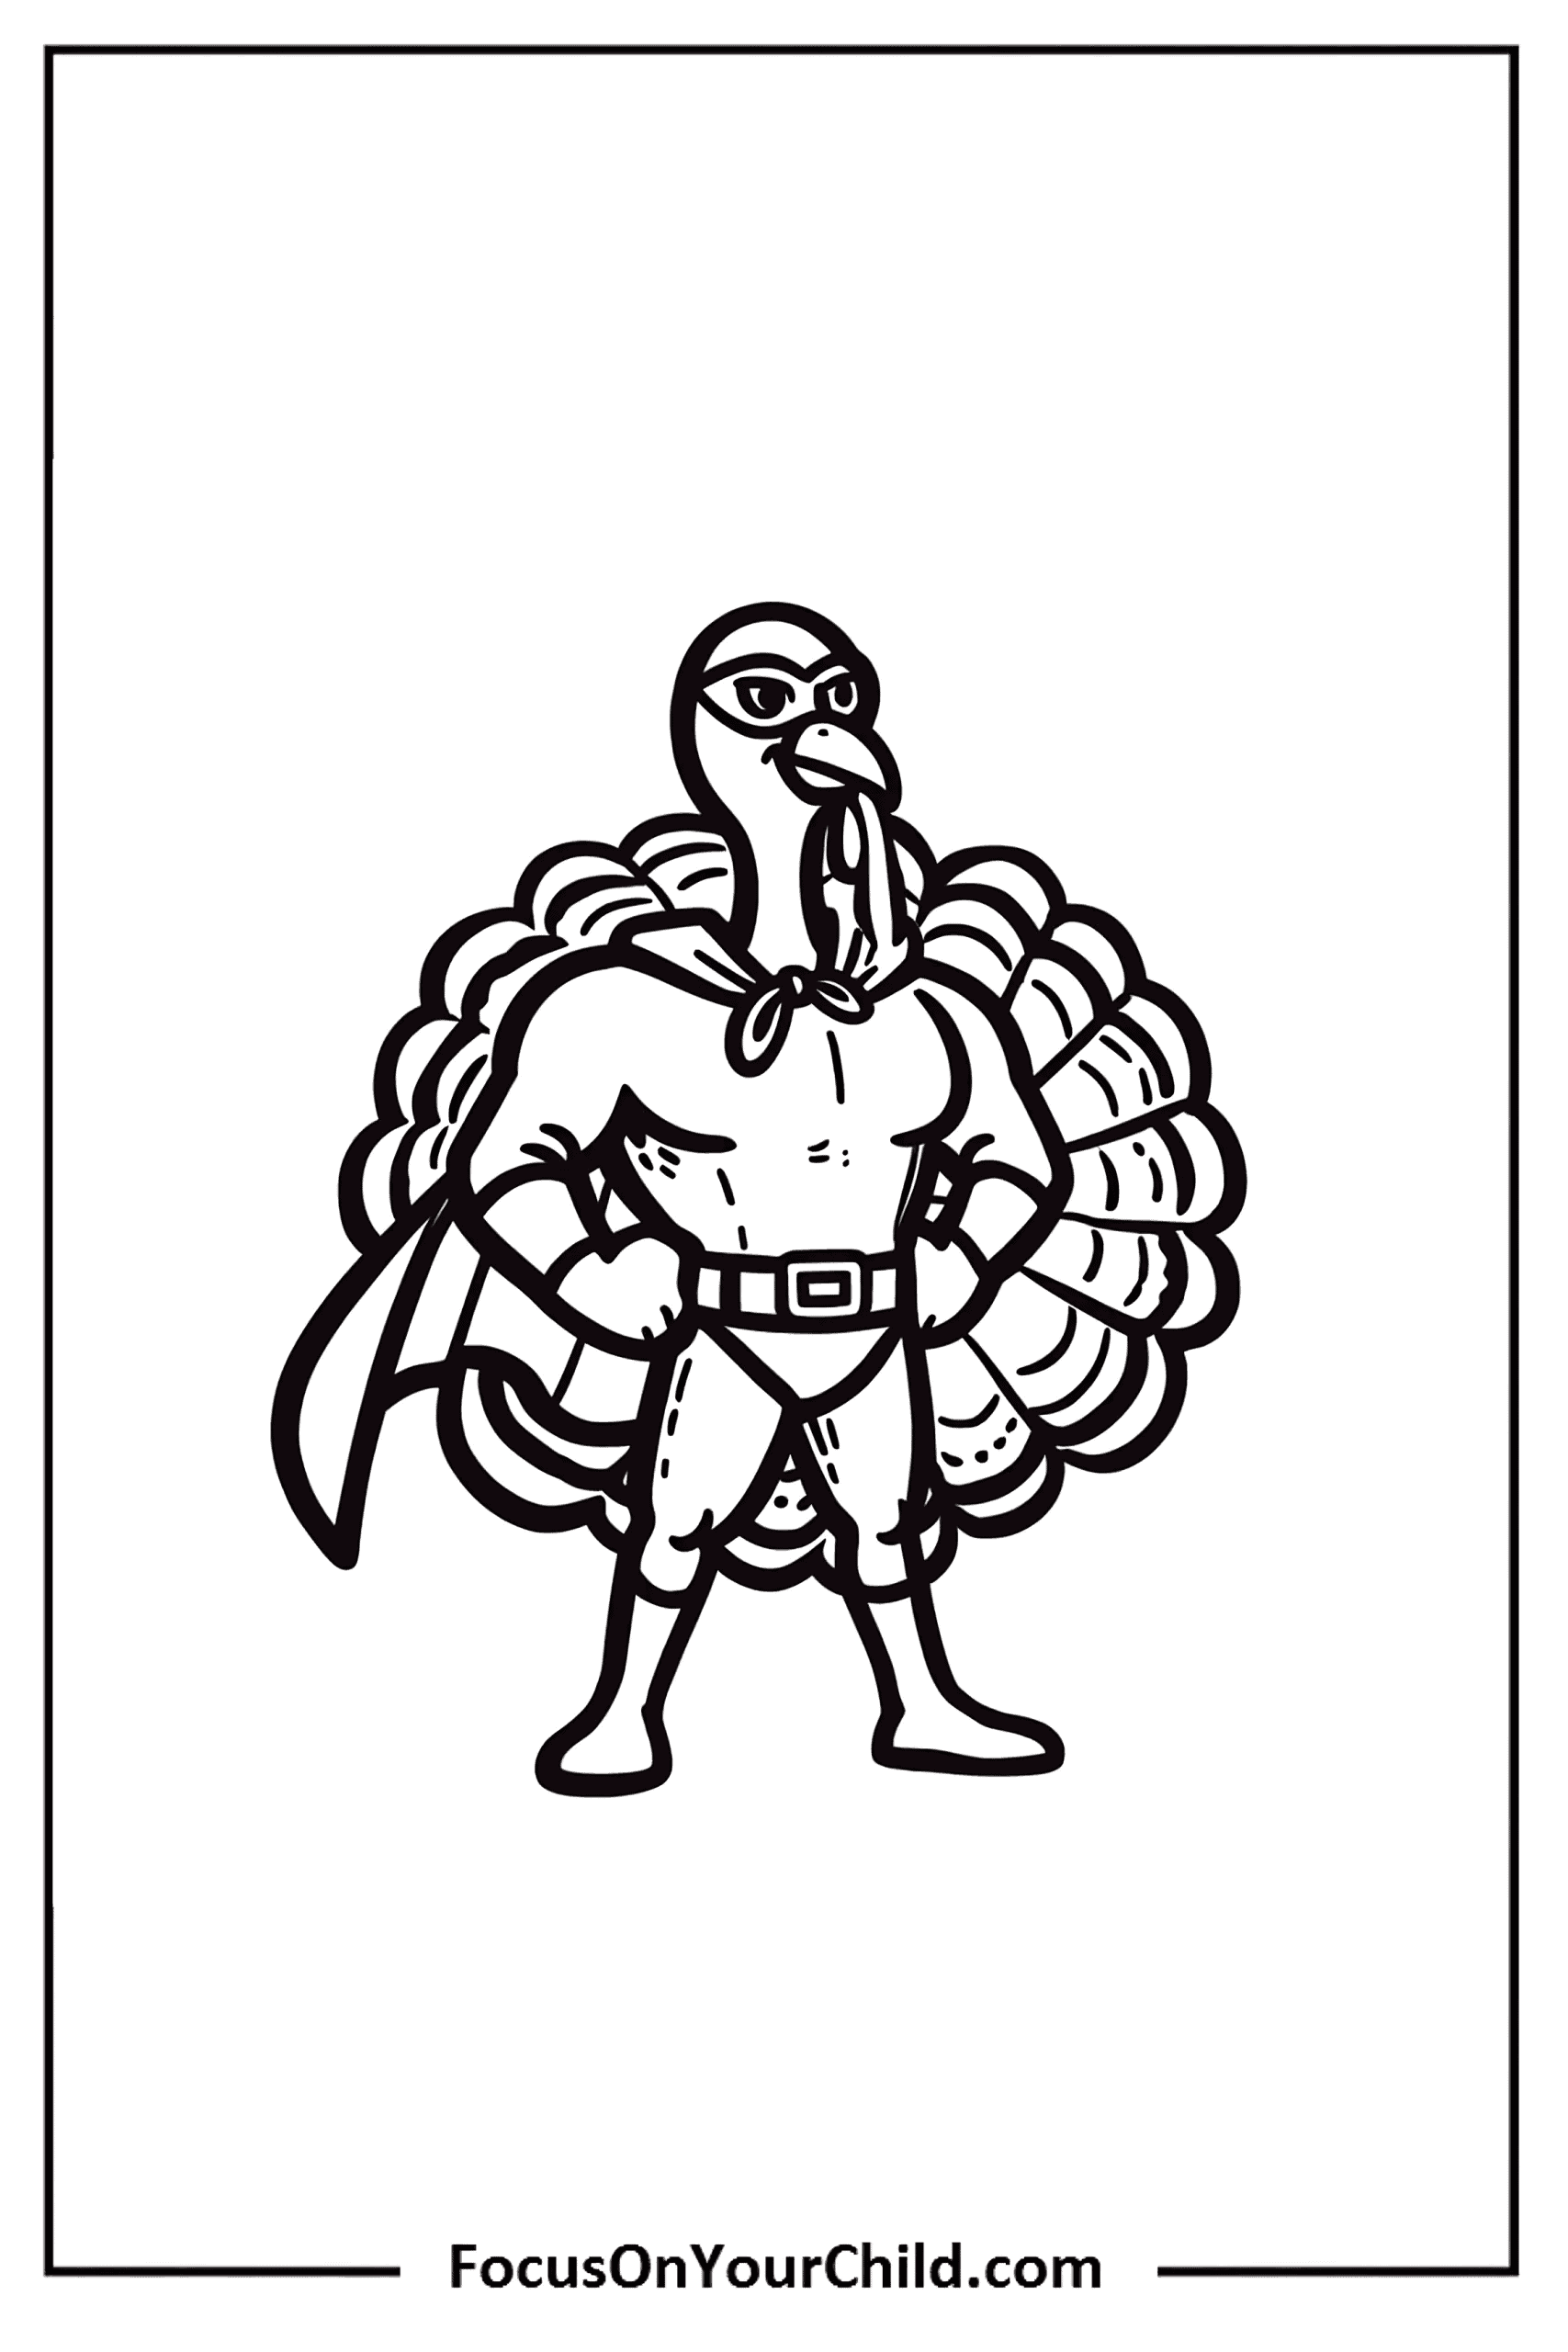 Superhero turkey with cape and mask, ready for action.